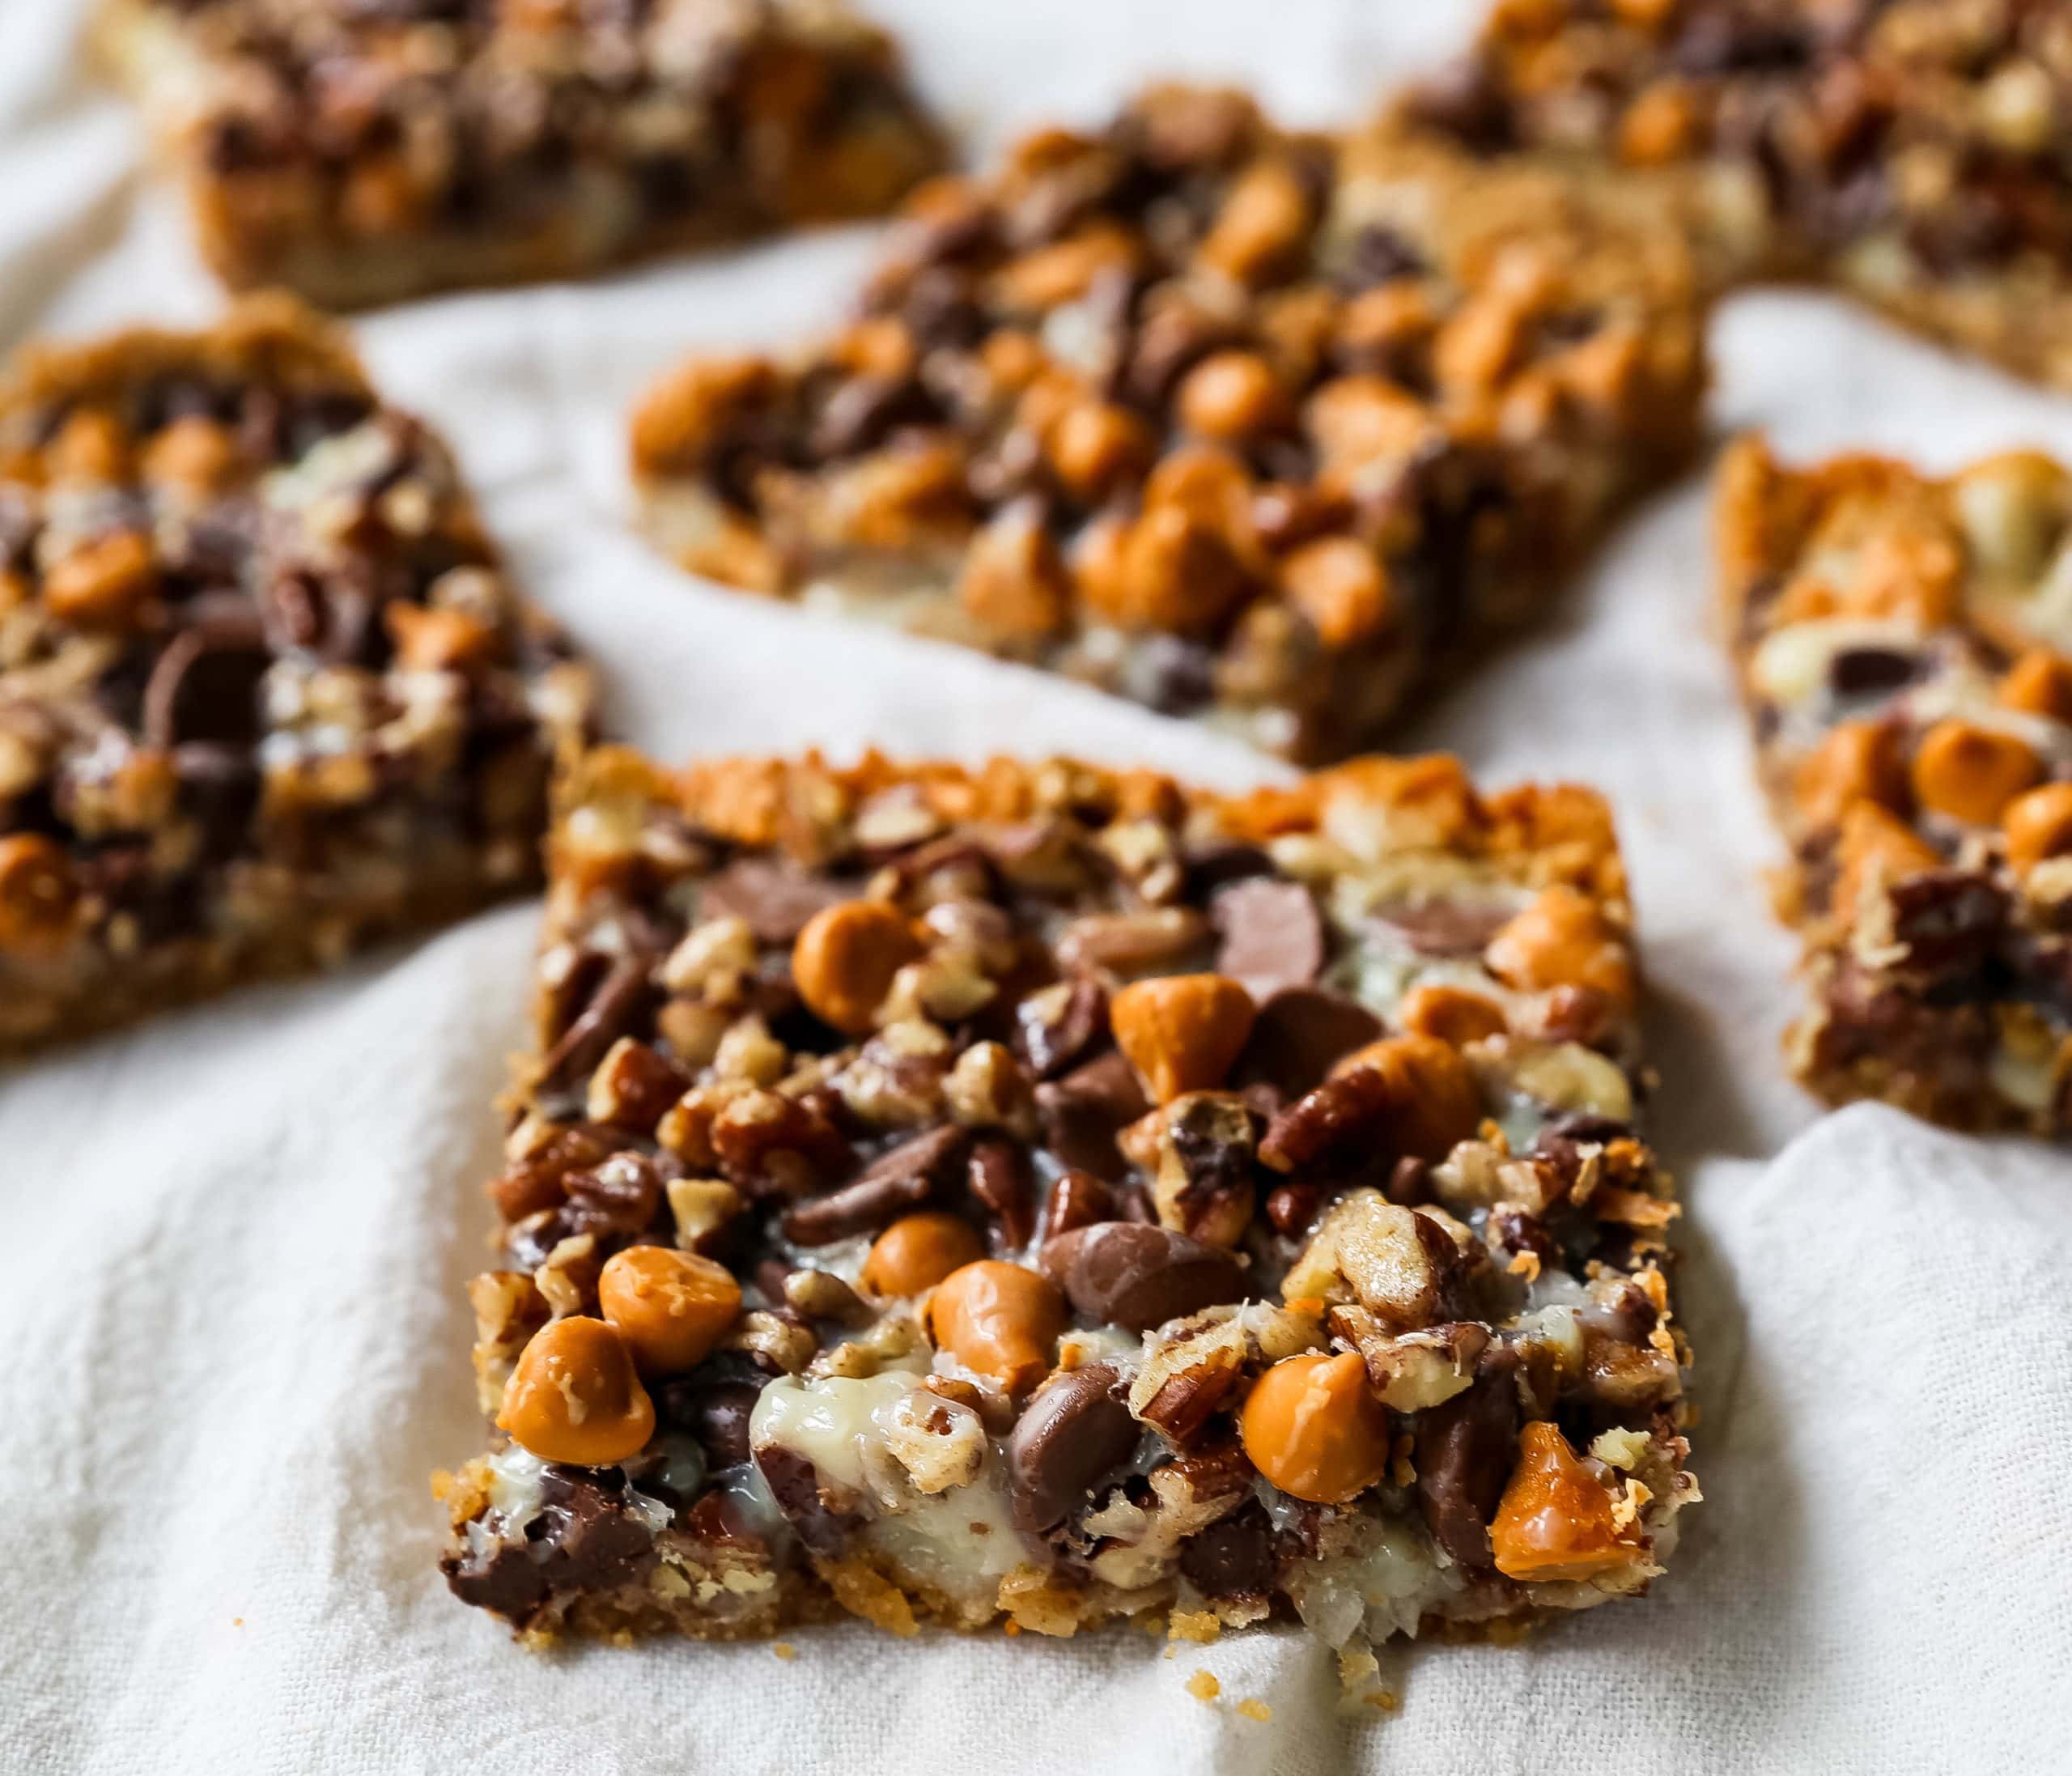 7-Layer Magic Bars. The famous dessert bars made with a graham cracker crust, sweetened flaked coconut, chocolate chips, butterscotch chips, nuts, all drizzled with sweetened condensed milk. The perfect dessert bar recipe! www.modernhoney.com #7layerbars #magicbars #magiccookiebars #sevenlayerbars 